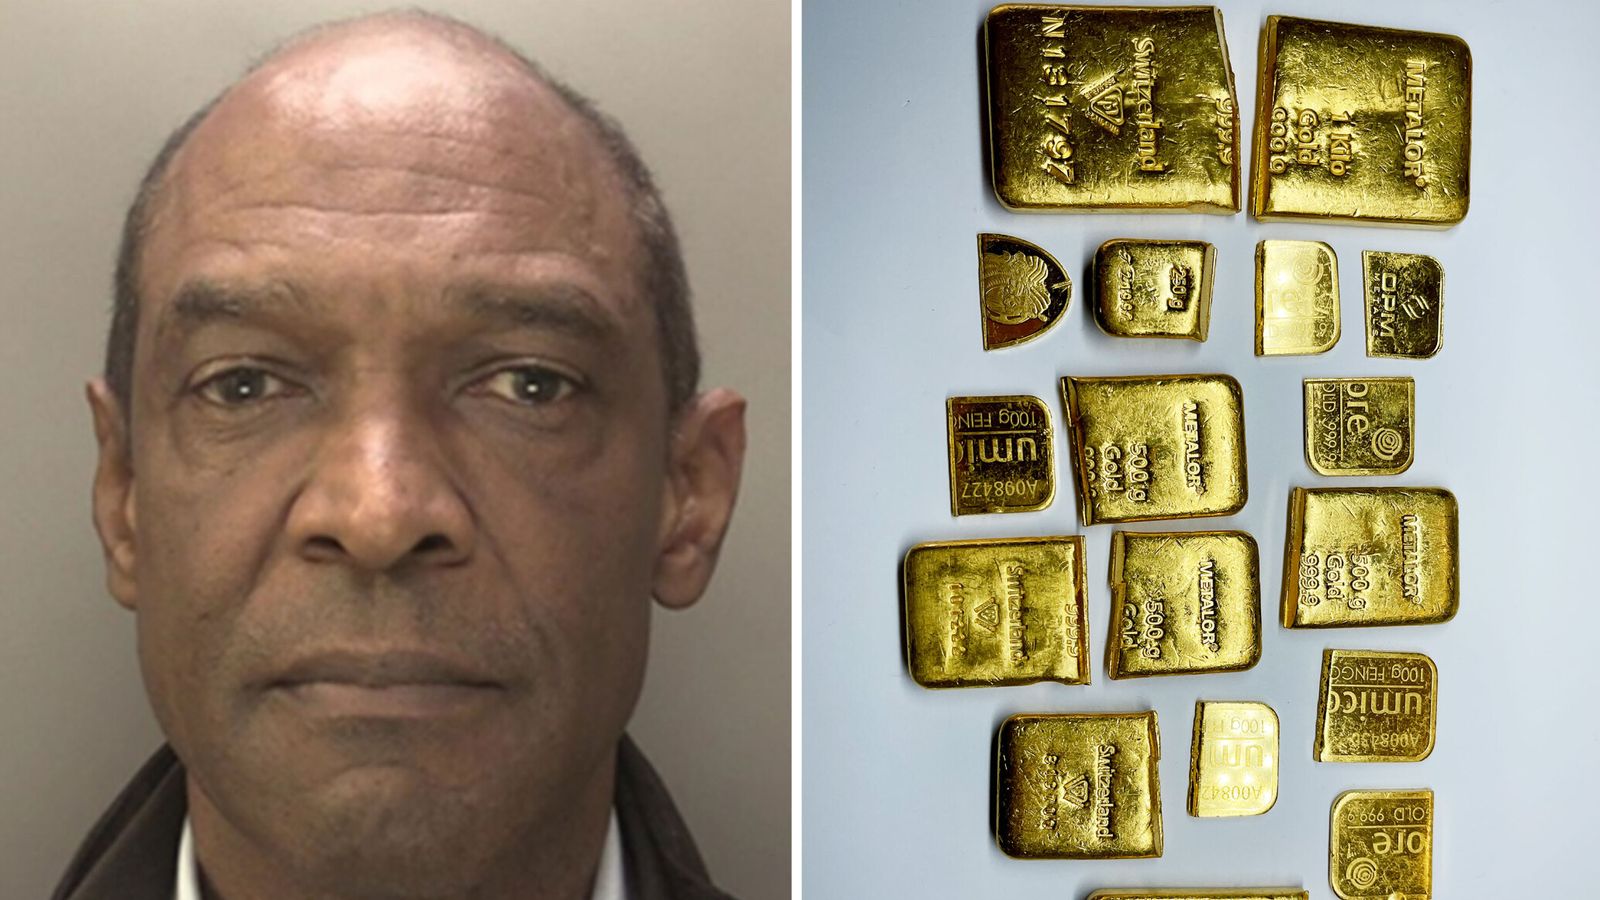 Gold bars and painting taken from 'prolific money launderer' will be sold